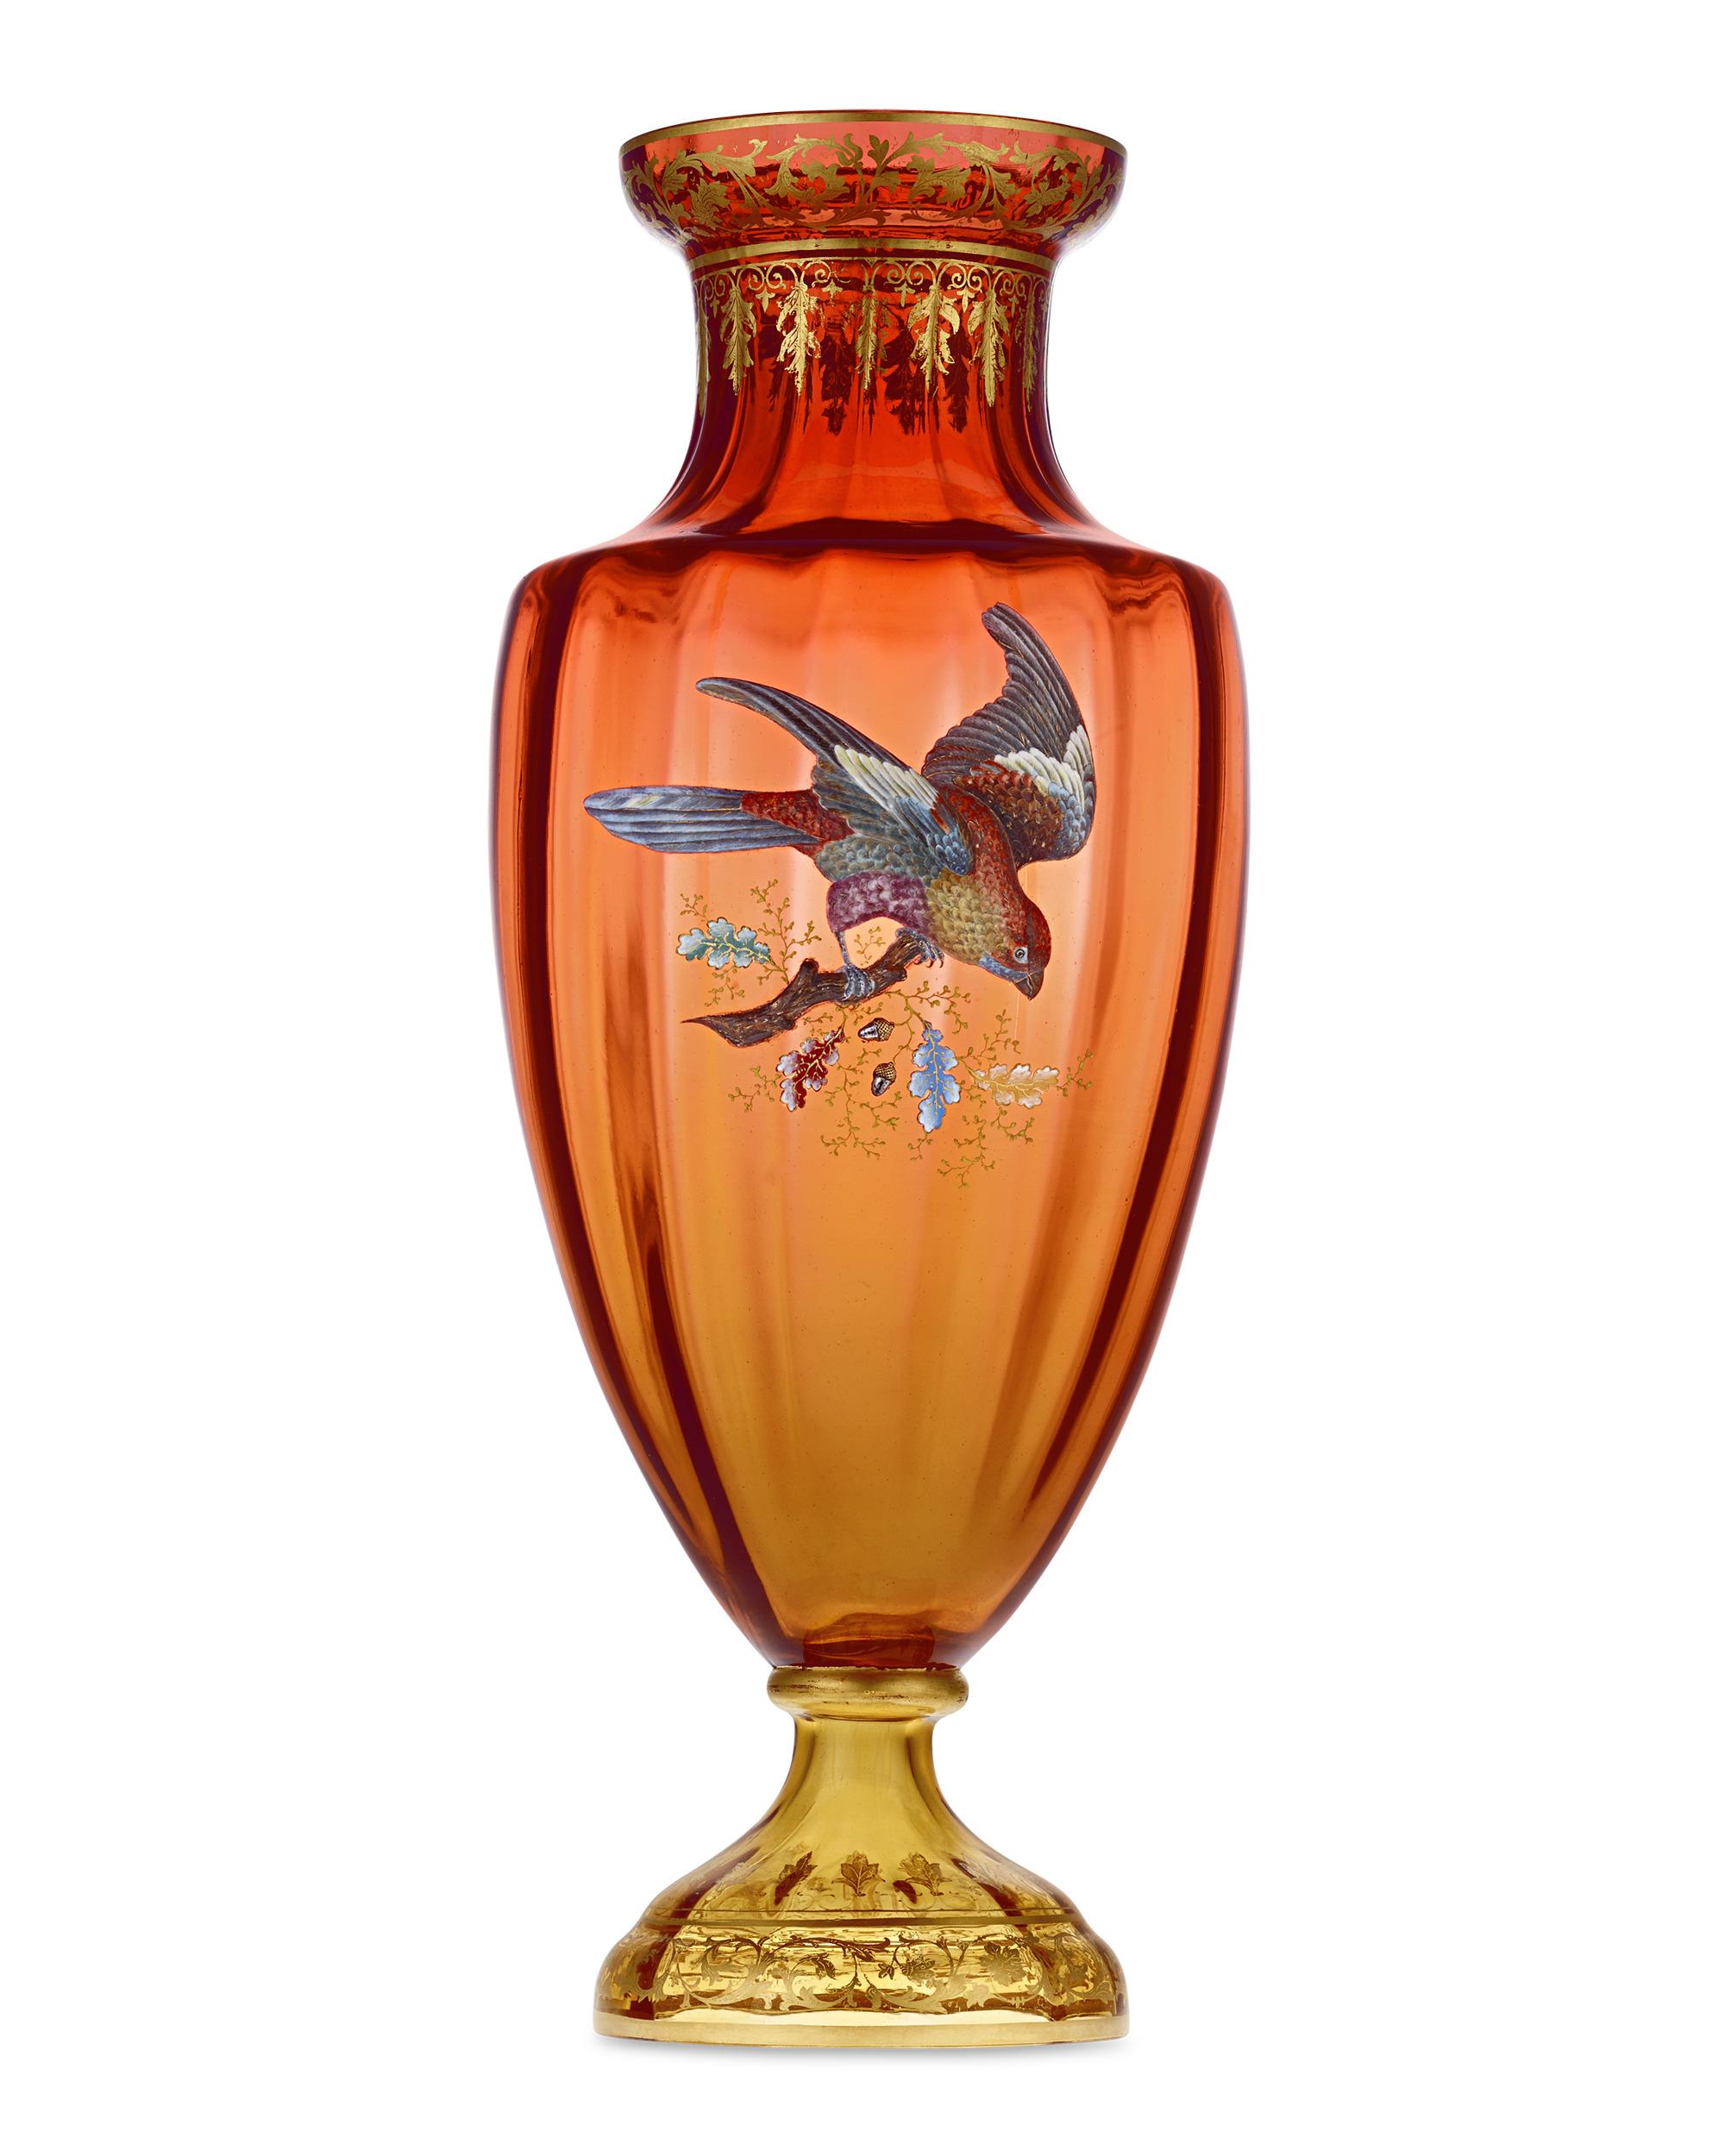 An exceptional avian motif graces this large glass vase by the revered Czech firm Moser. The raised enamel bird is matched well by the gilded amber glass. Recognized as the foremost Bohemian producer of artistic glassware, Moser has been crafting